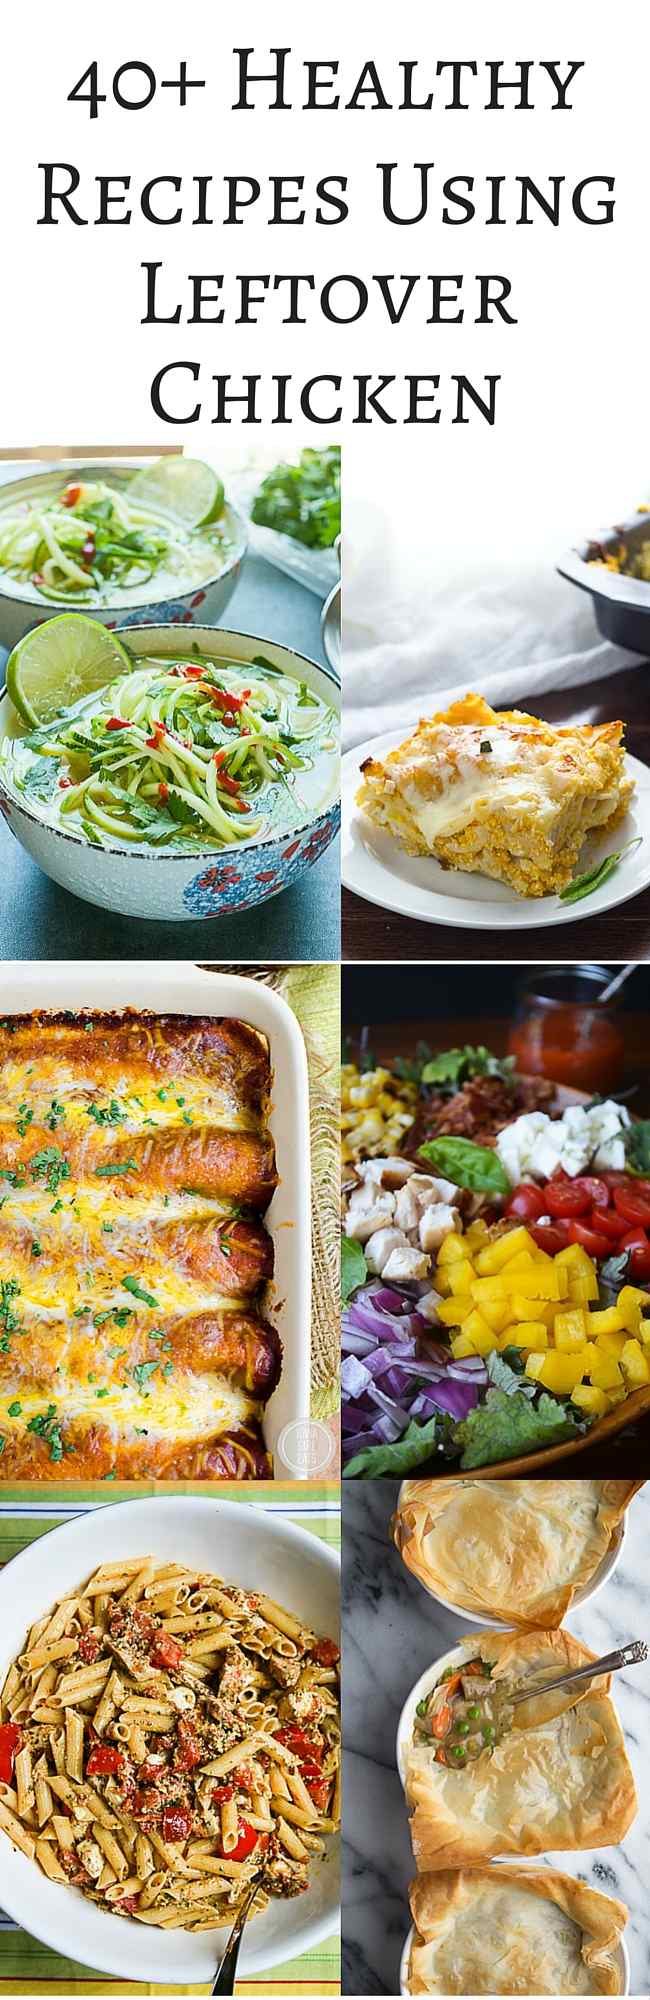 40+ Healthy Recipes Using Leftover Chicken - use leftover roasted, grilled, and poached chicken in salads, soups, enchiladas, empanadas, pasta and more